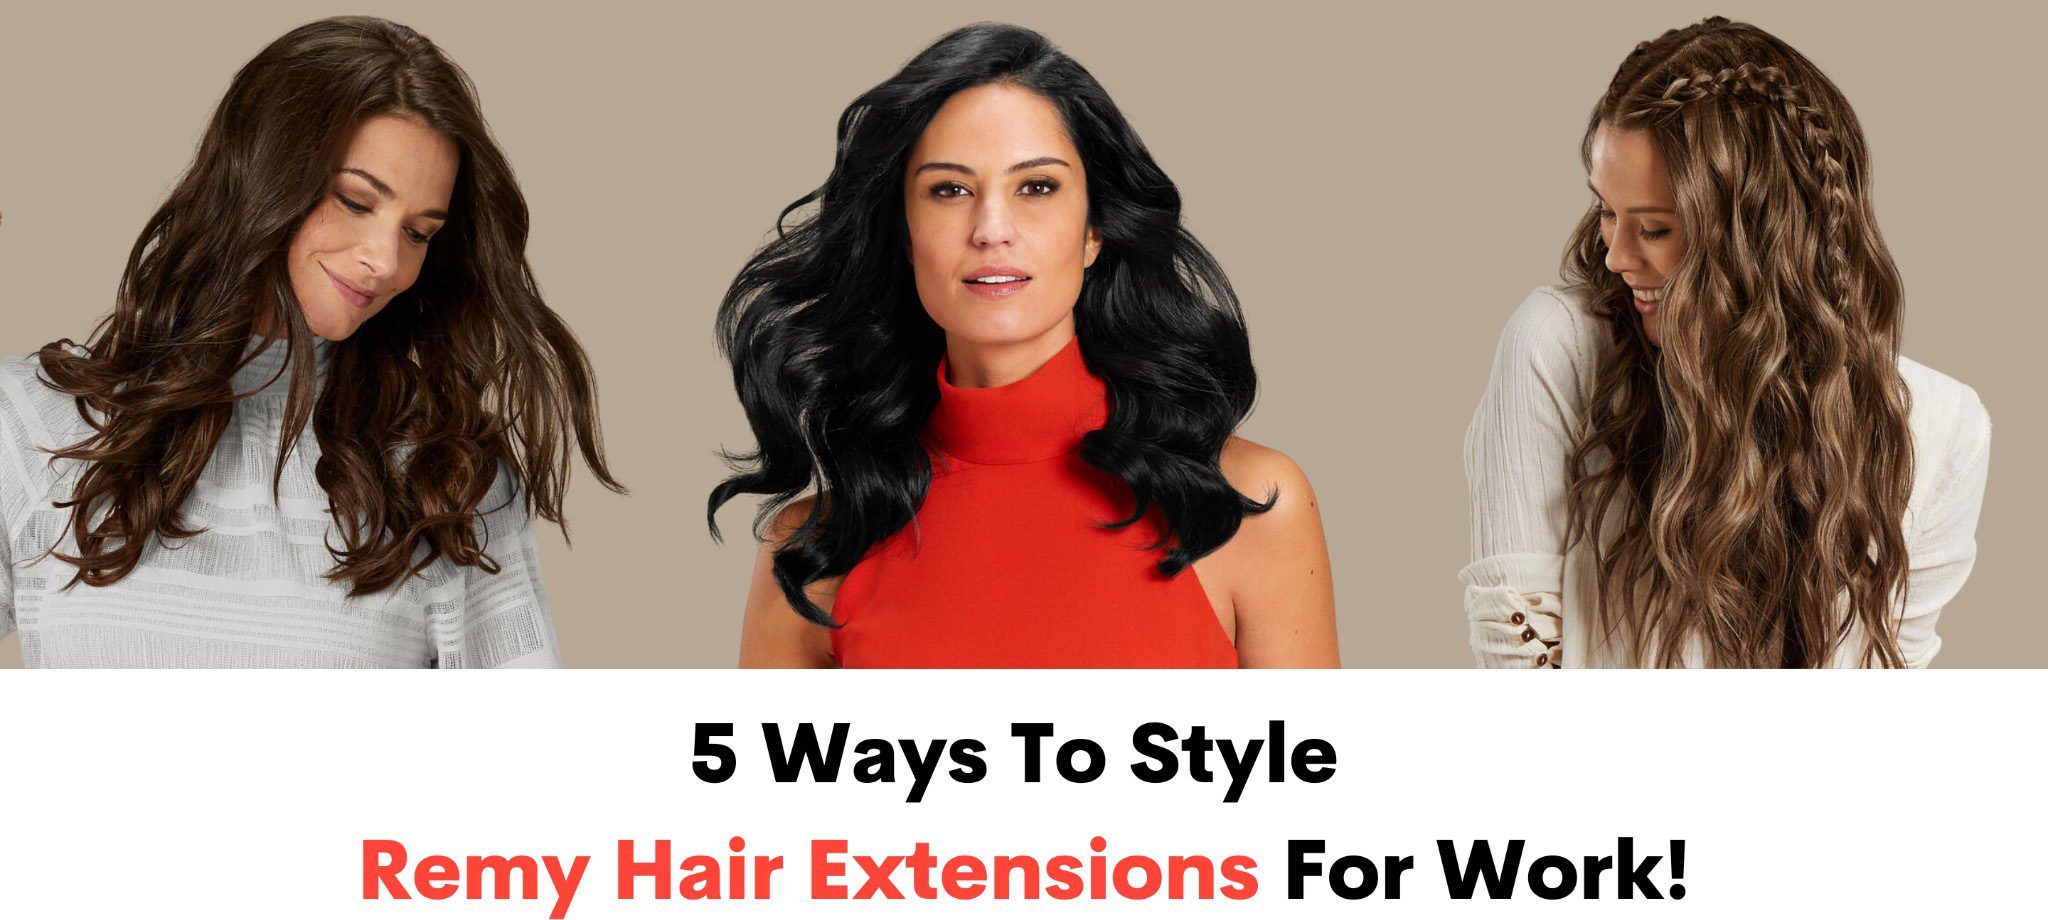 5 ways to style remy hair extensions for work